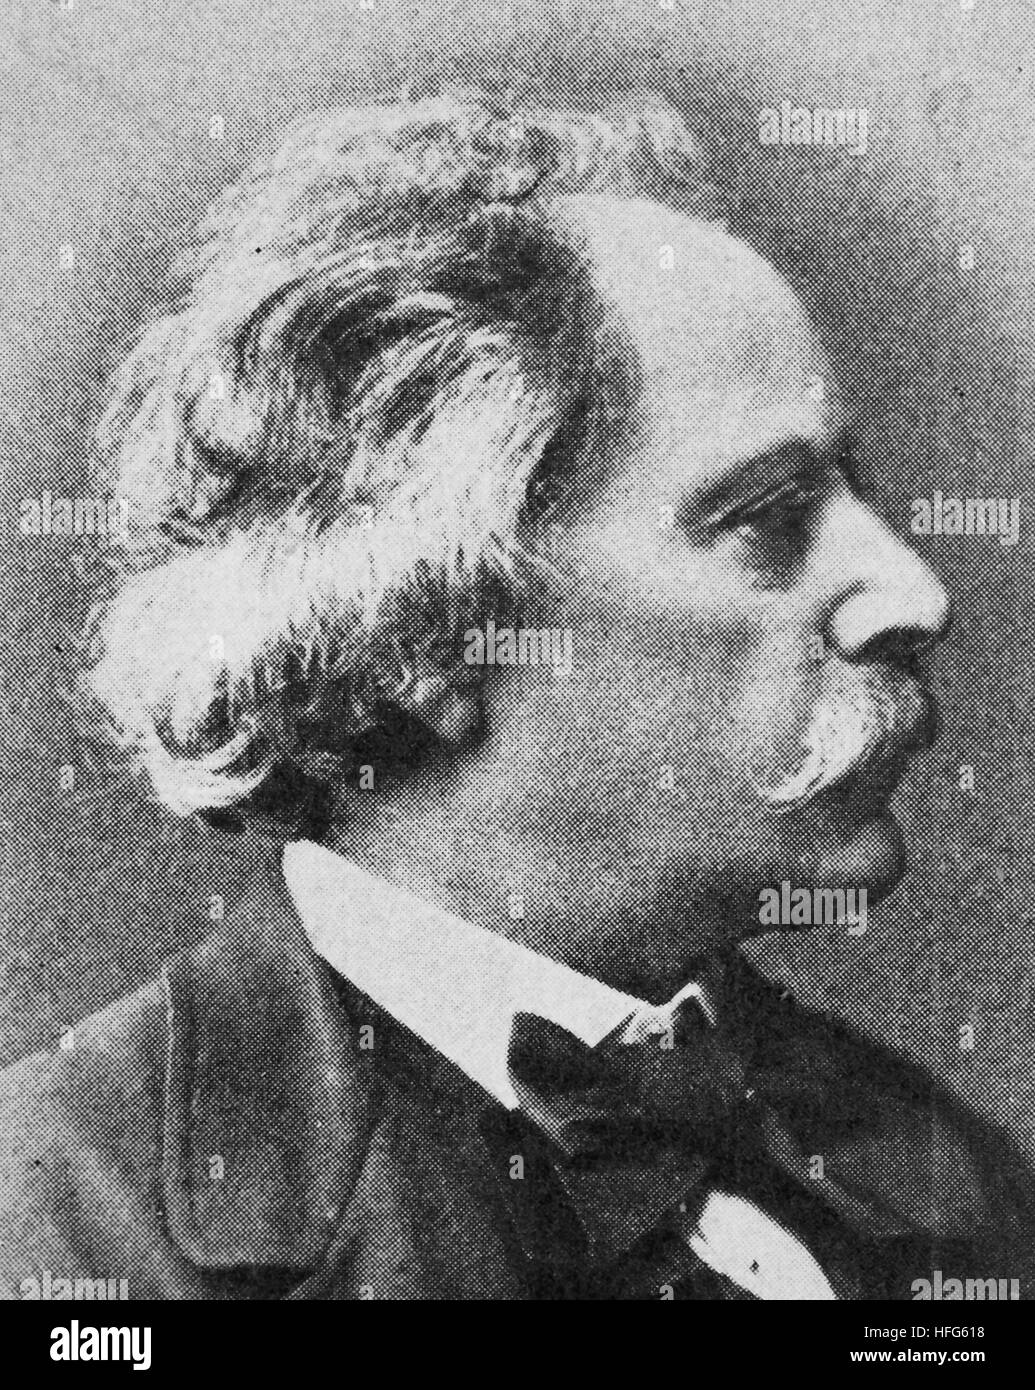 Karl Goldmark Karoly Goldmark, 1830 - 1915, was a Hungarian-born Viennese composer, reproduction photo from the year 1895, digital improved Stock Photo